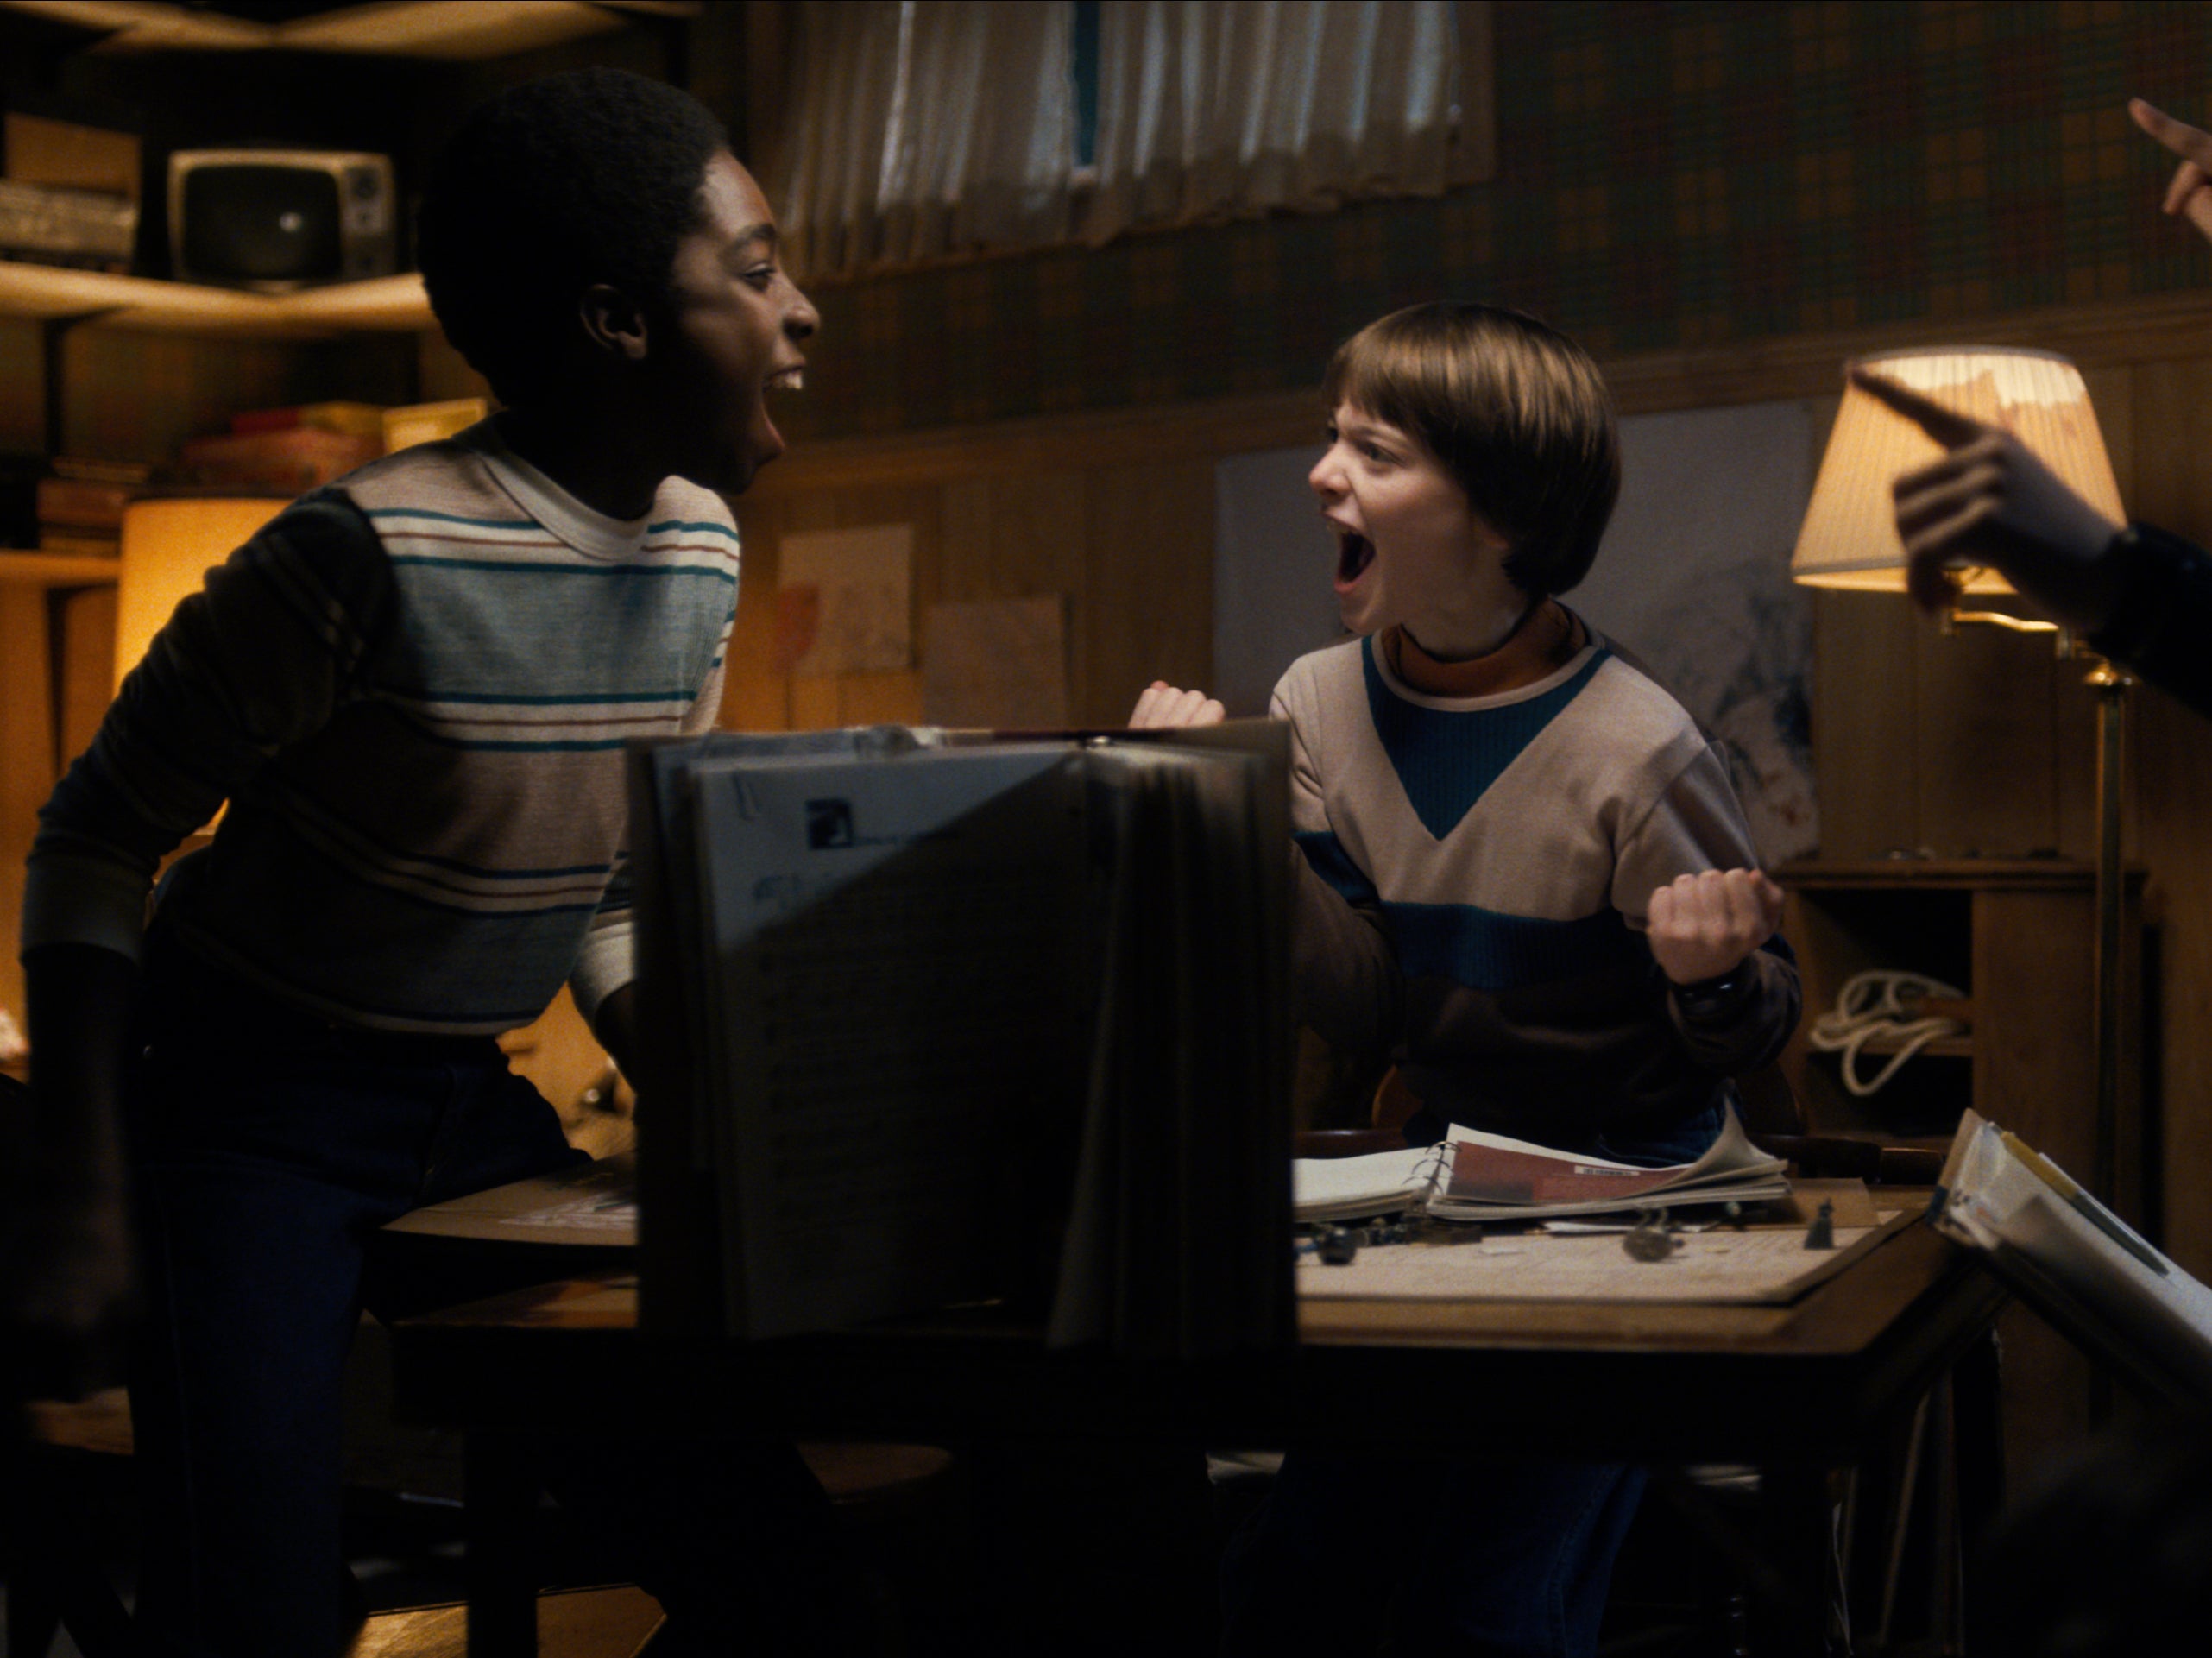 The Stranger Things kids enjoy a game of D&D during season one of the hit Netflix sci-fi